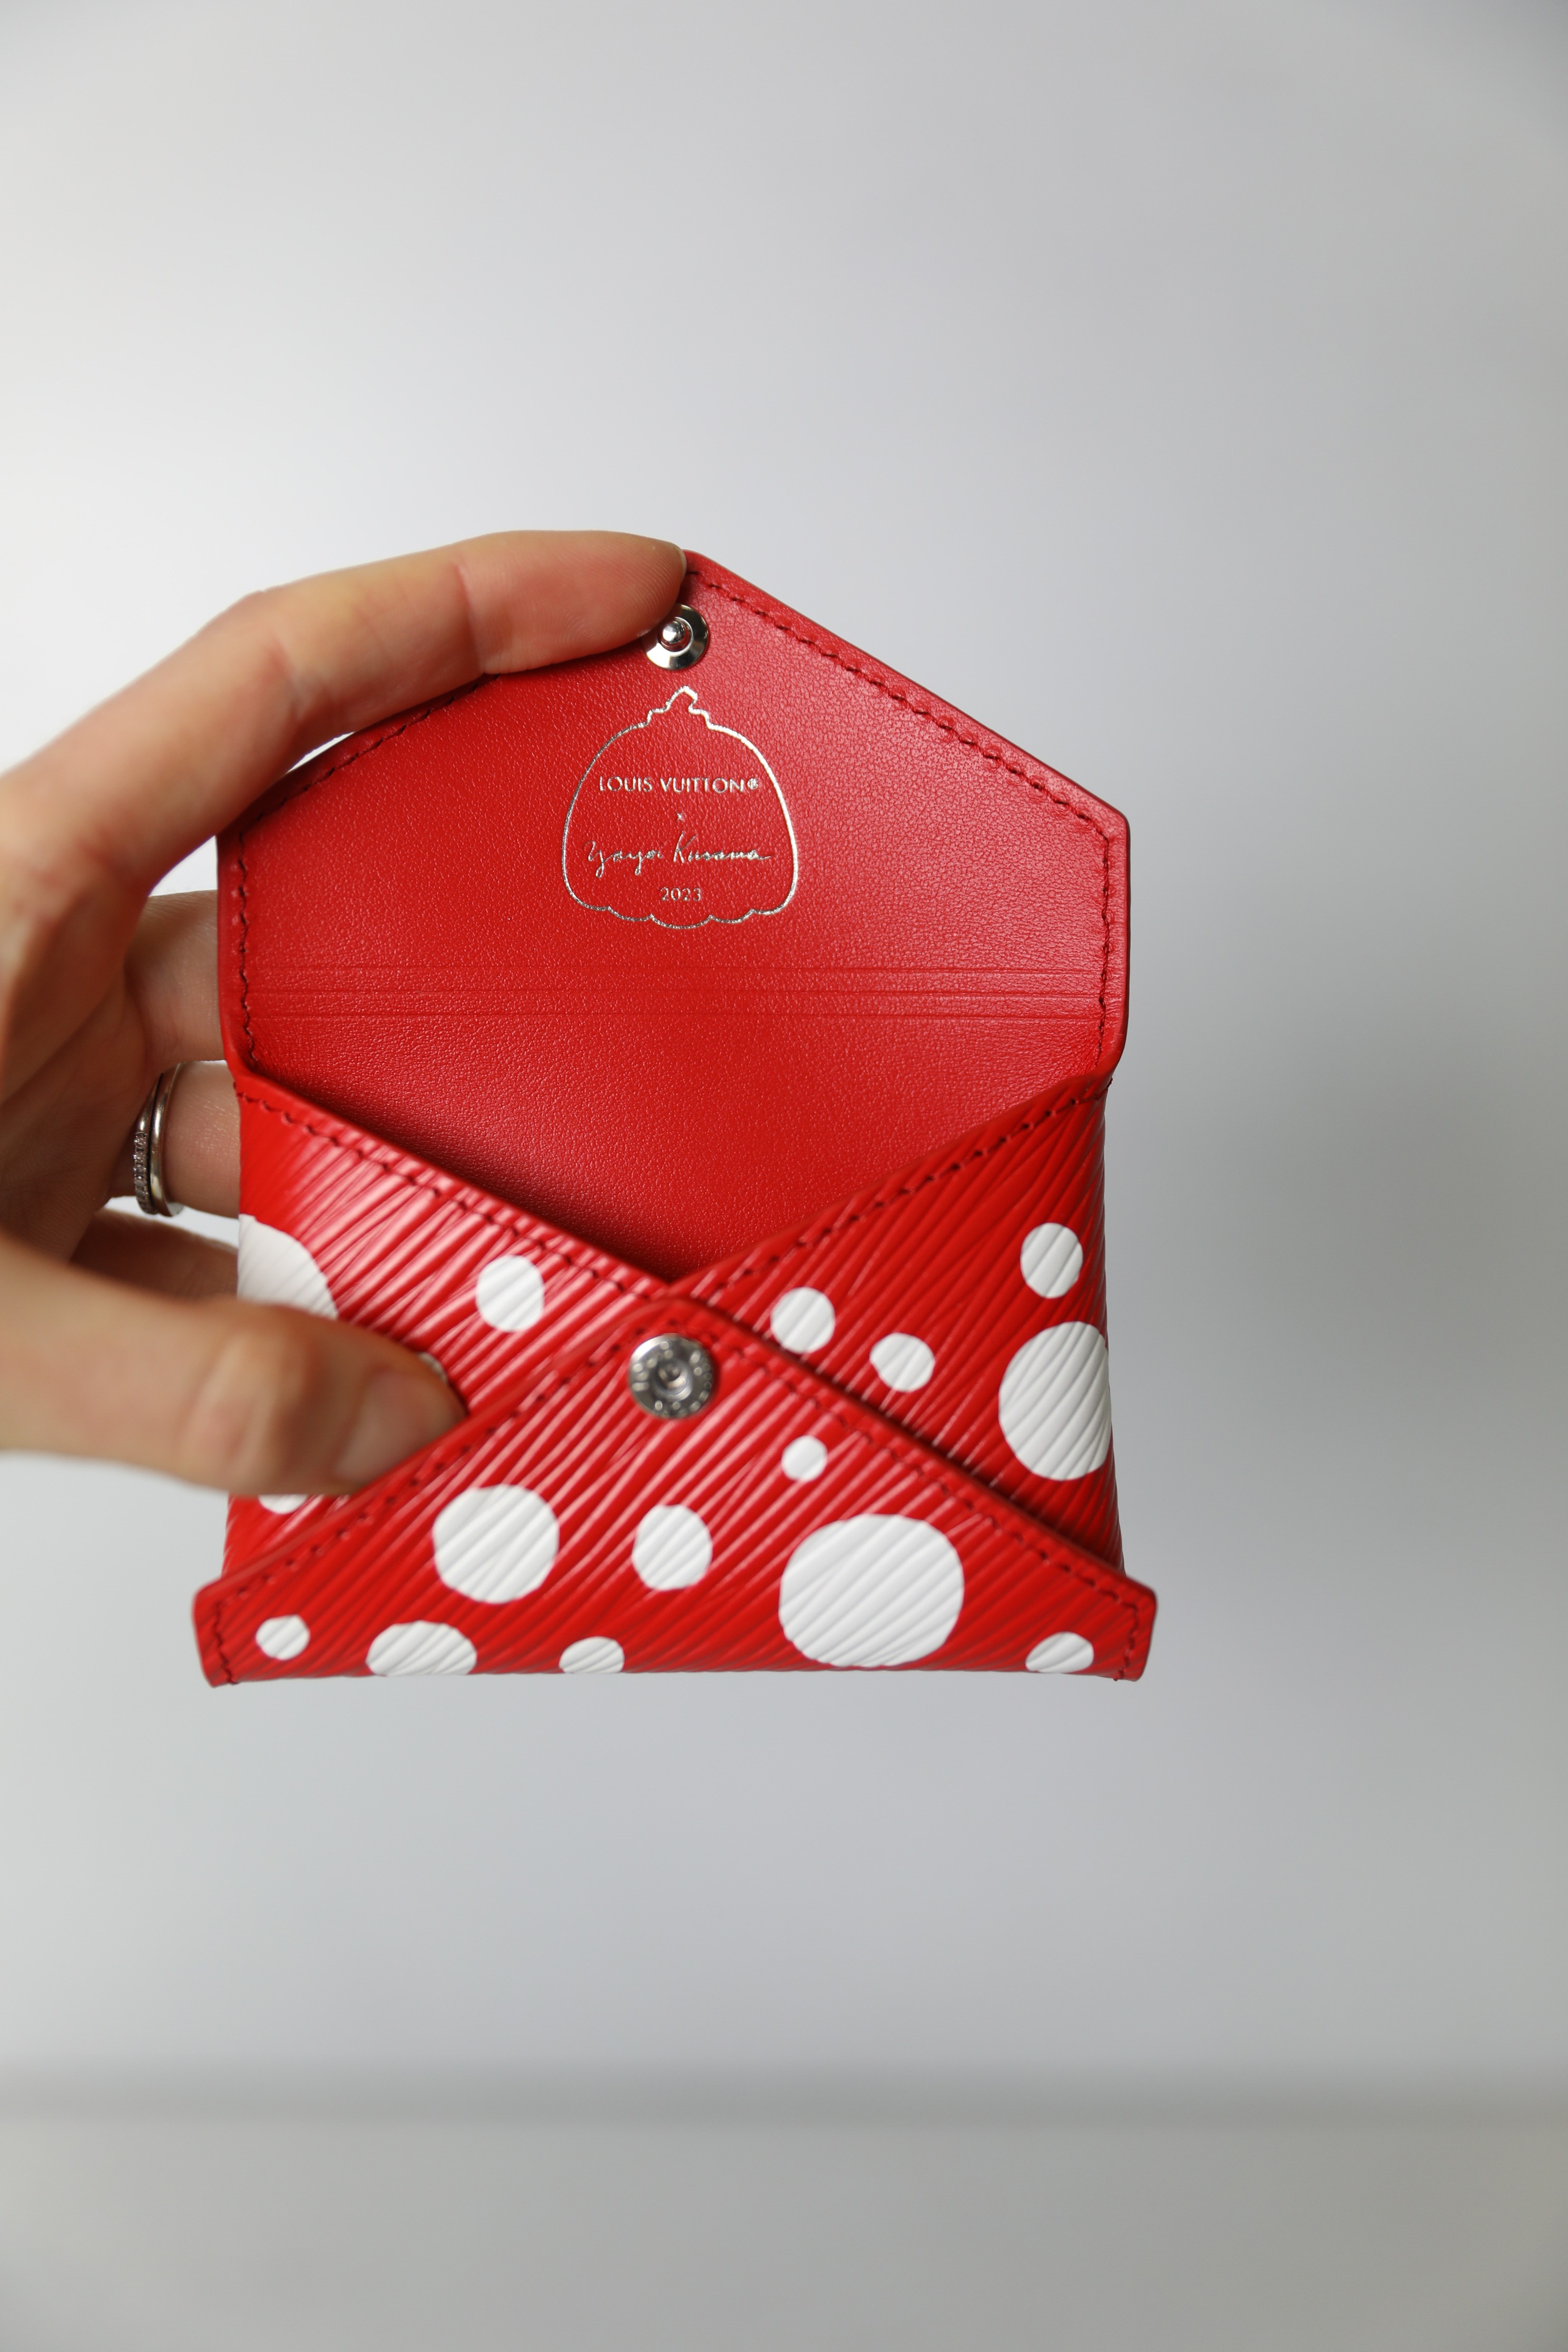 louis vuitton red packet 2023